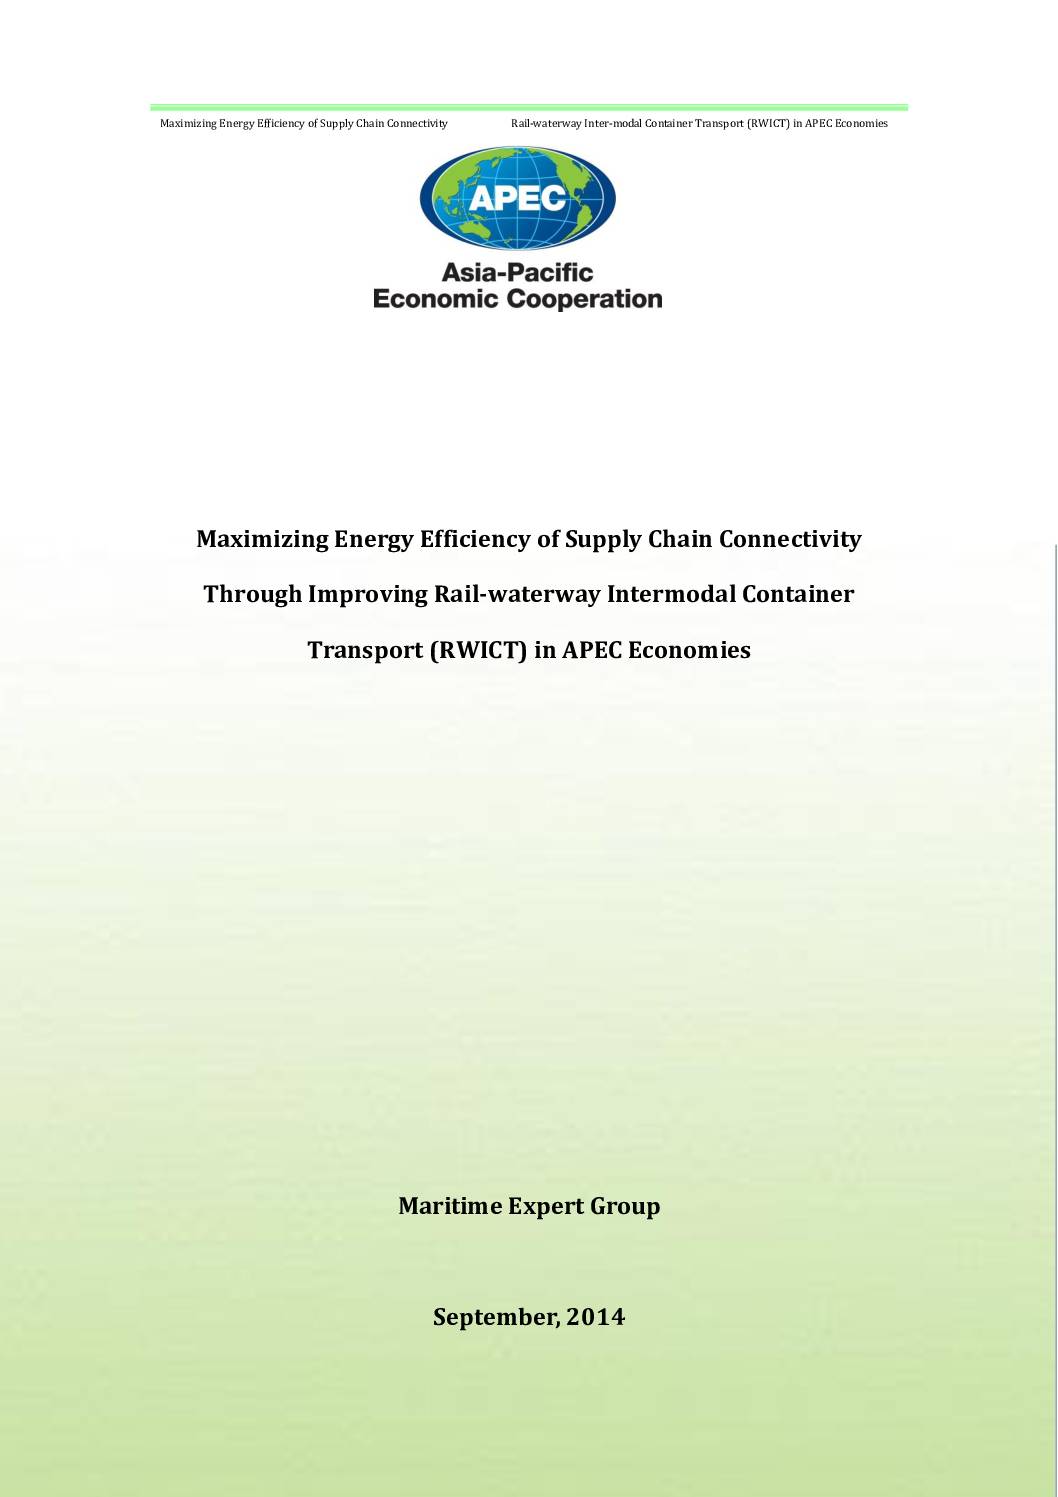 Maximizing Energy Efficiency of Supply Chain Connectivity Through Improving Rail-waterway Intermodal Container Transport (RWICT) in APEC Economies